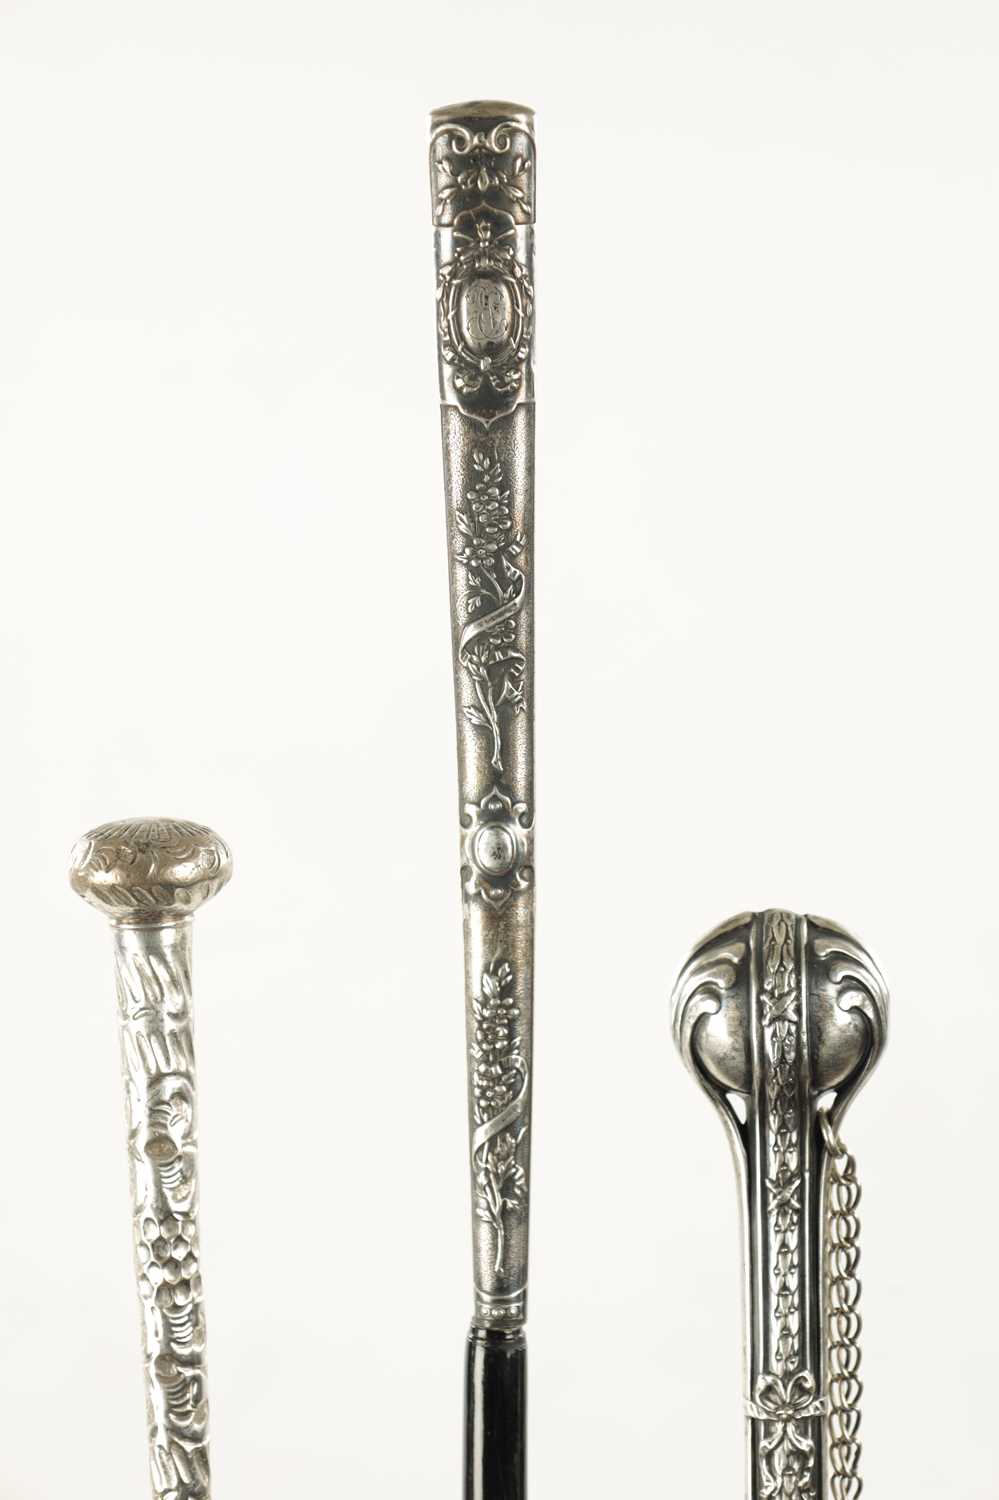 A COLLECTION OF THREE LATE 19TH CENTURY SILVER TOPPED LONG-HANDLED WALKING STICKS - Image 3 of 9